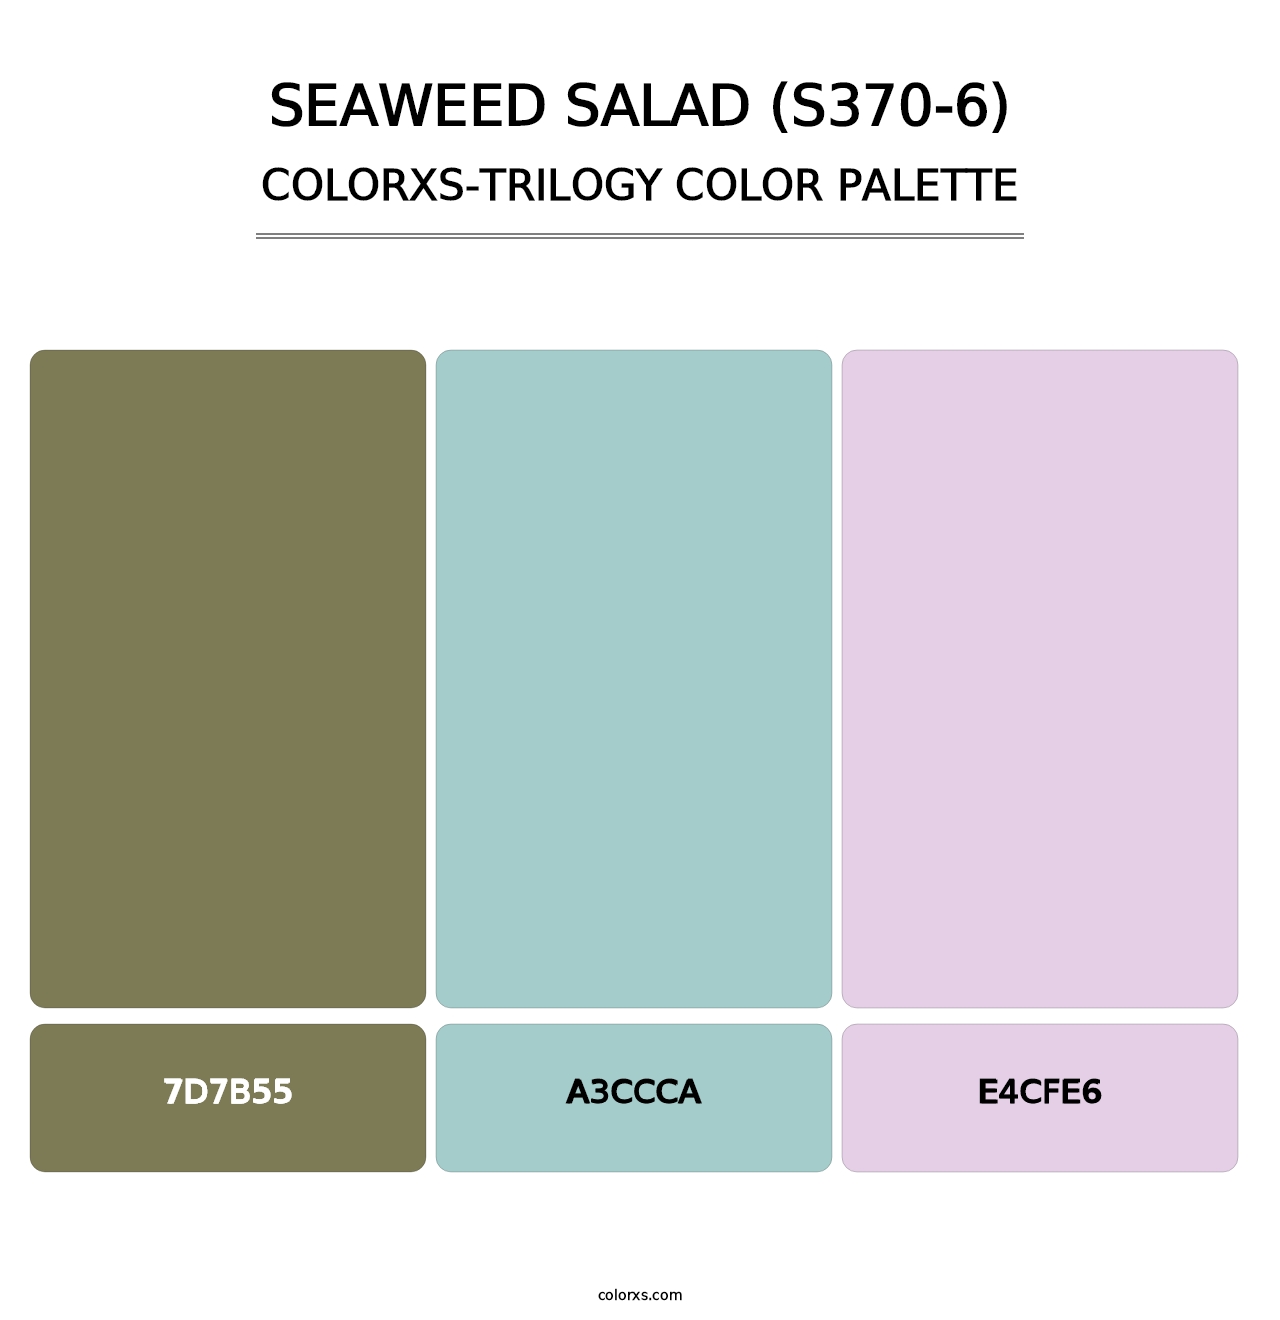 Seaweed Salad (S370-6) - Colorxs Trilogy Palette